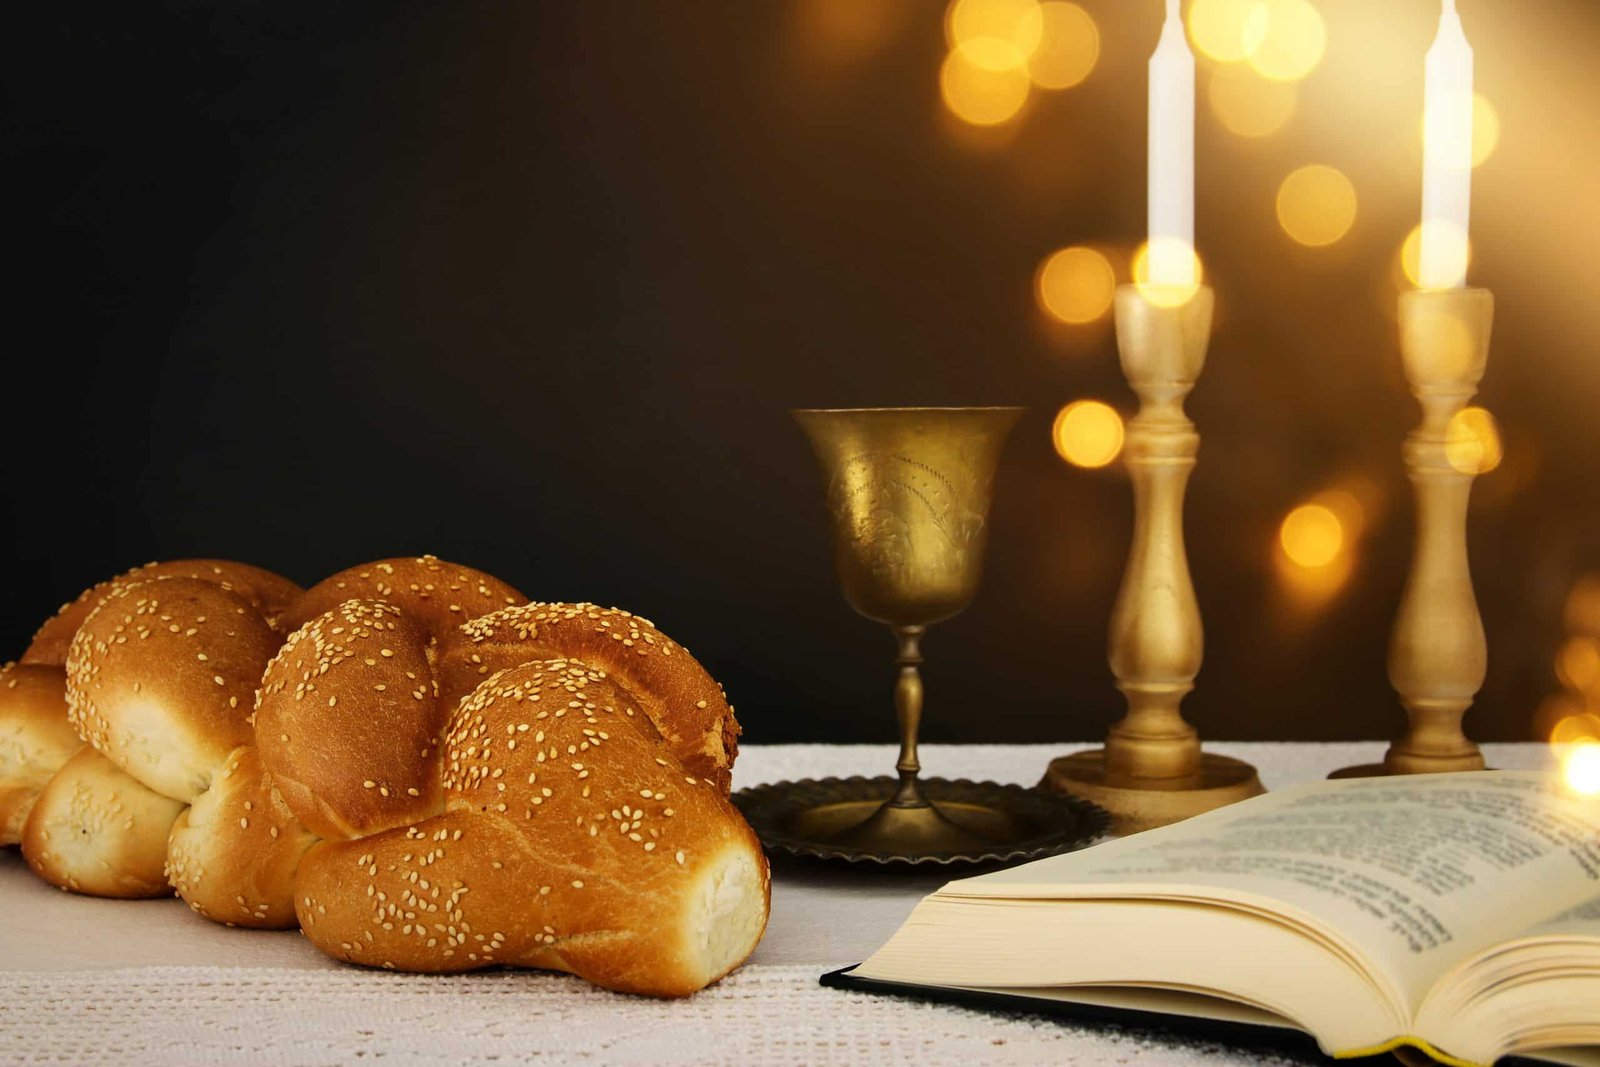 Significance of Shabbat in Israel